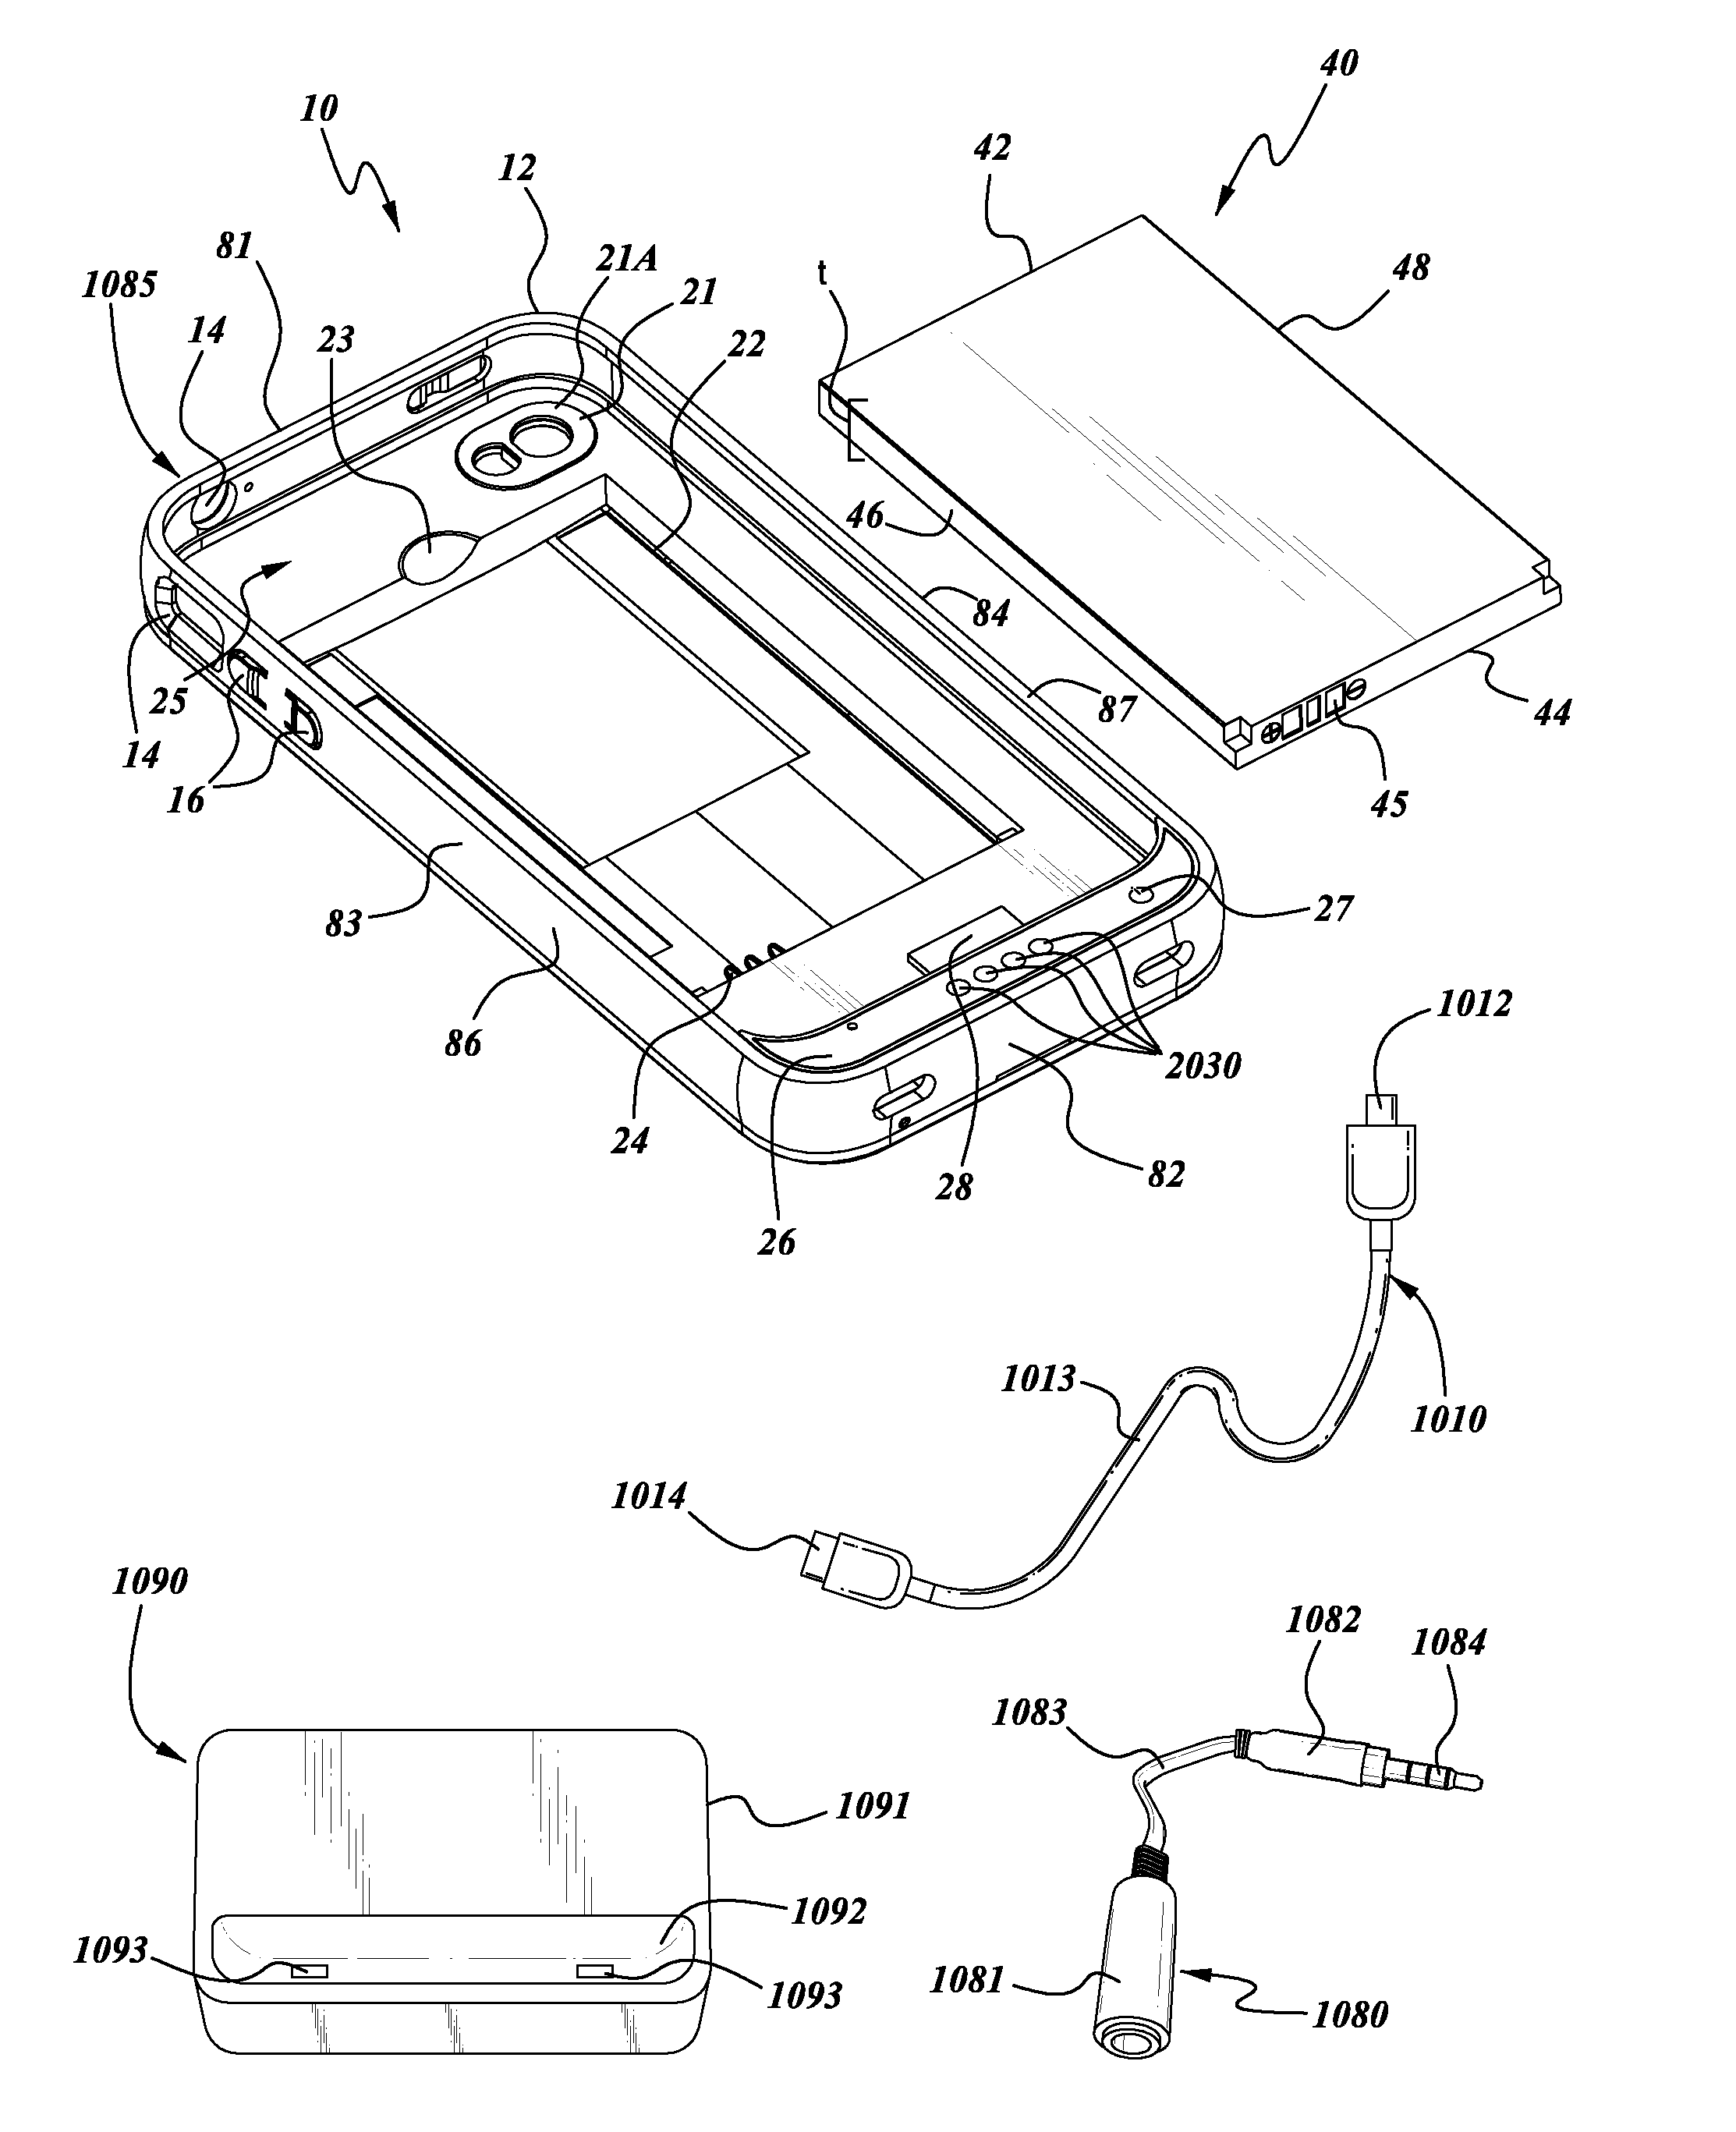 Protective case for mobile device with auxiliary battery and power control